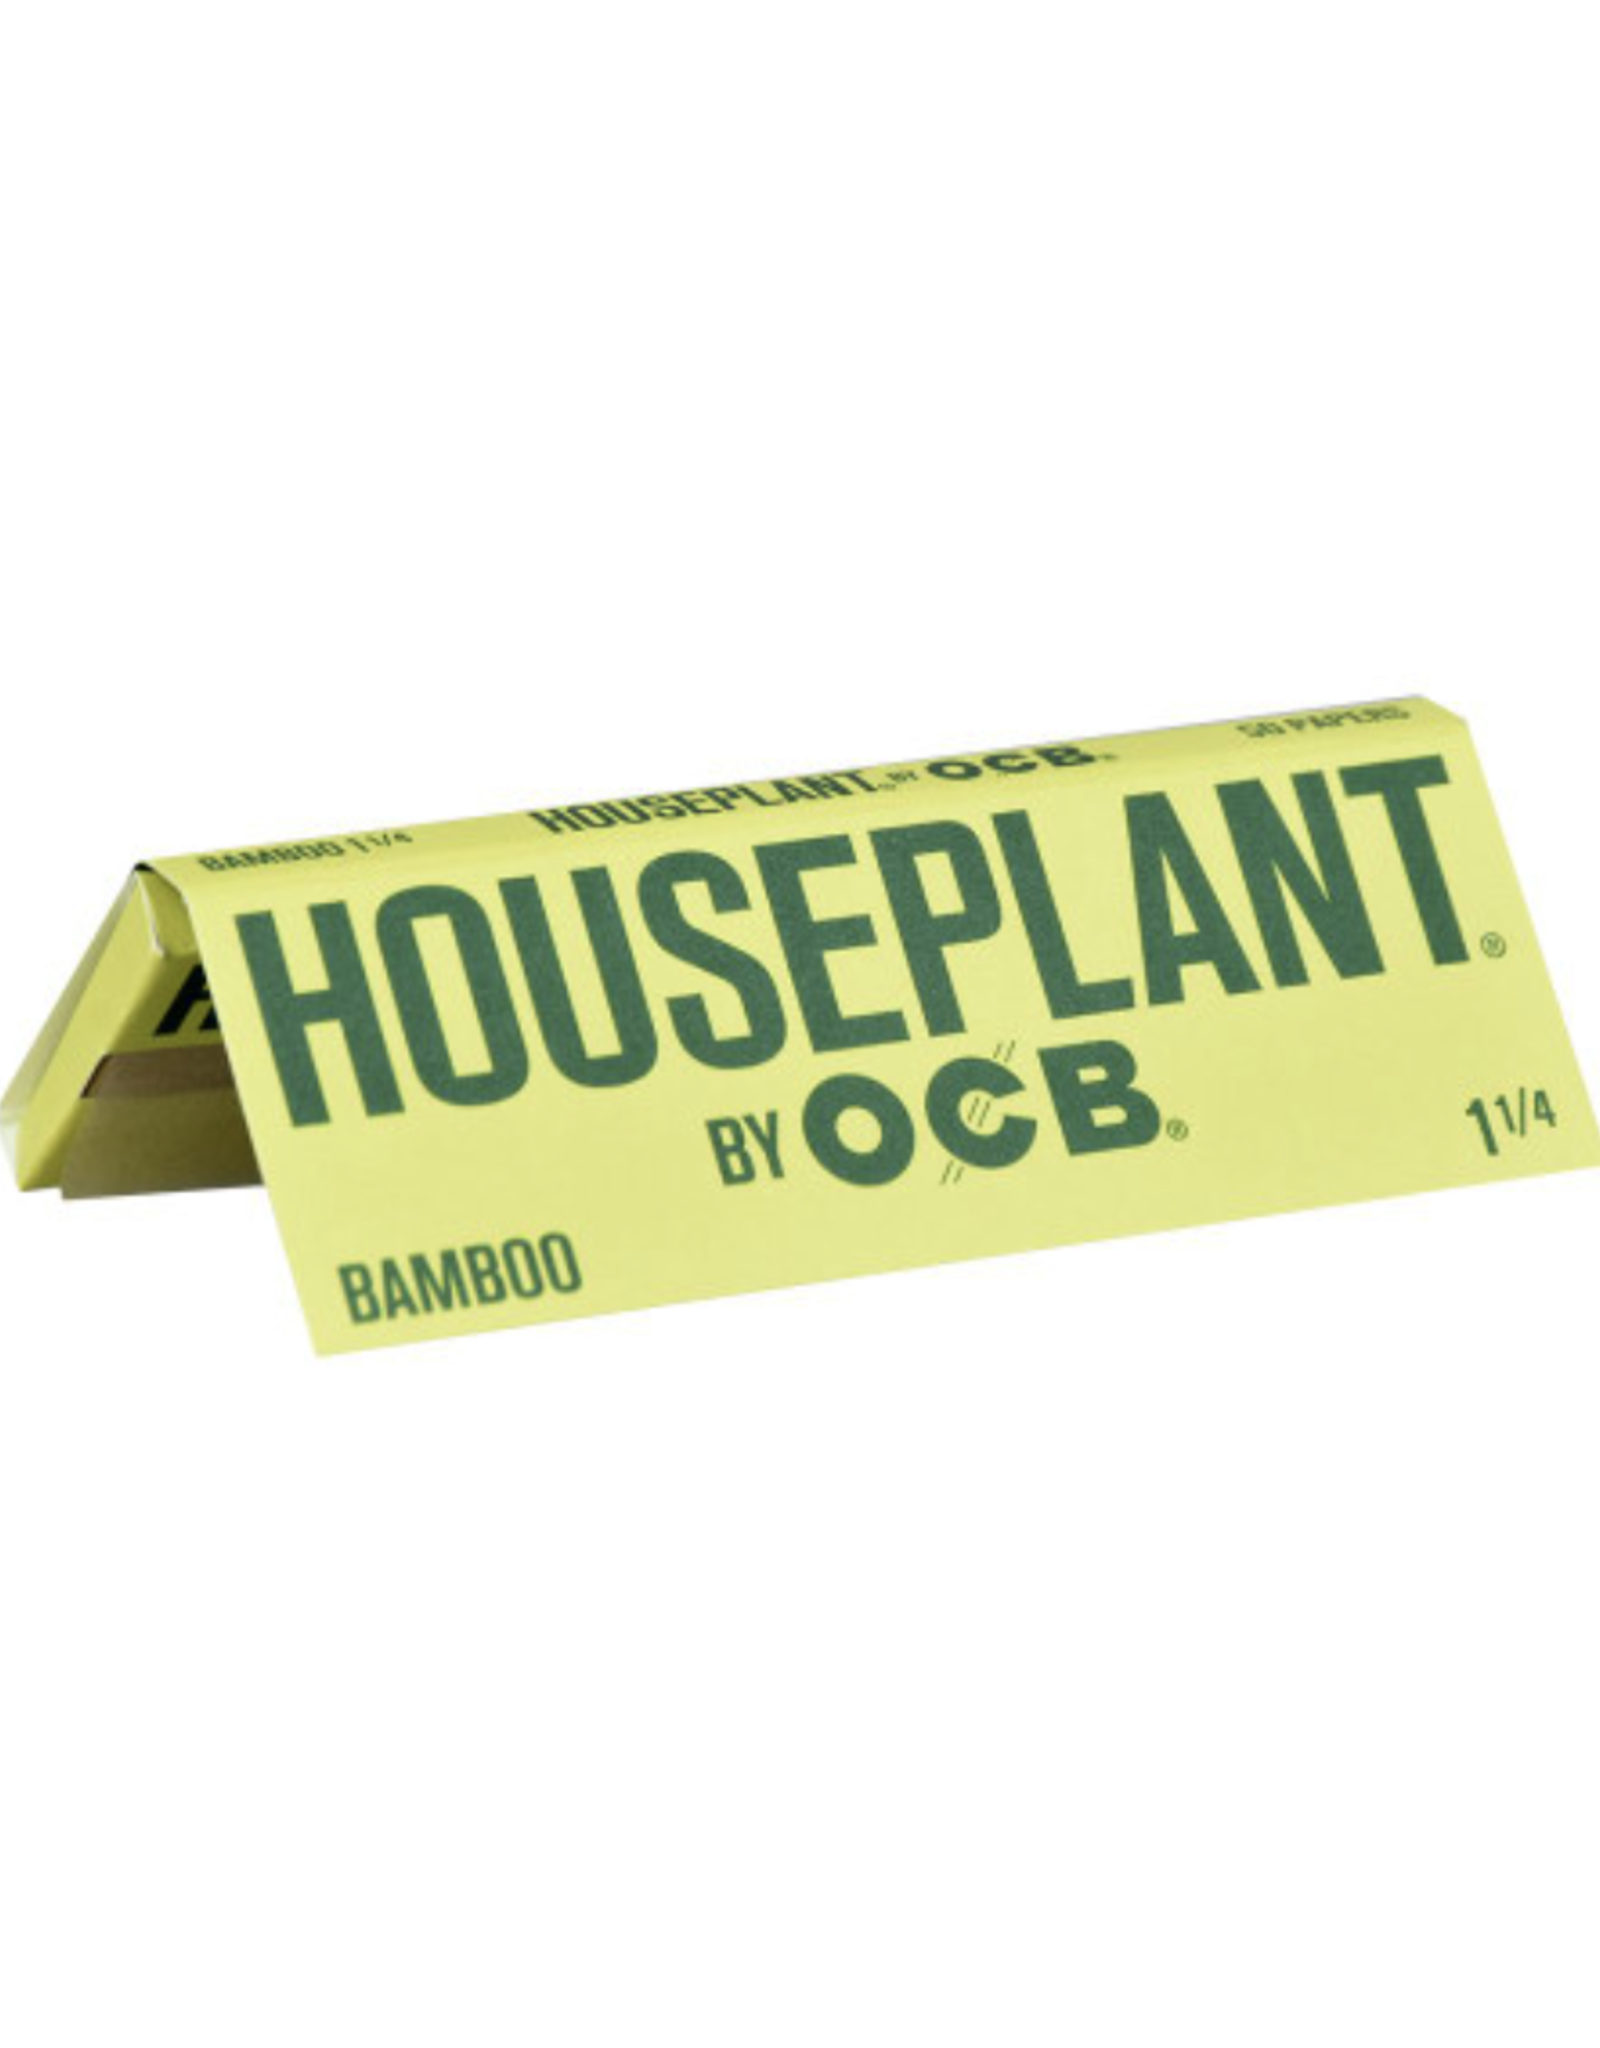 OCB Houseplant by OCB Bamboo 1.25 Rolling Papers - 50 Papers/Pack